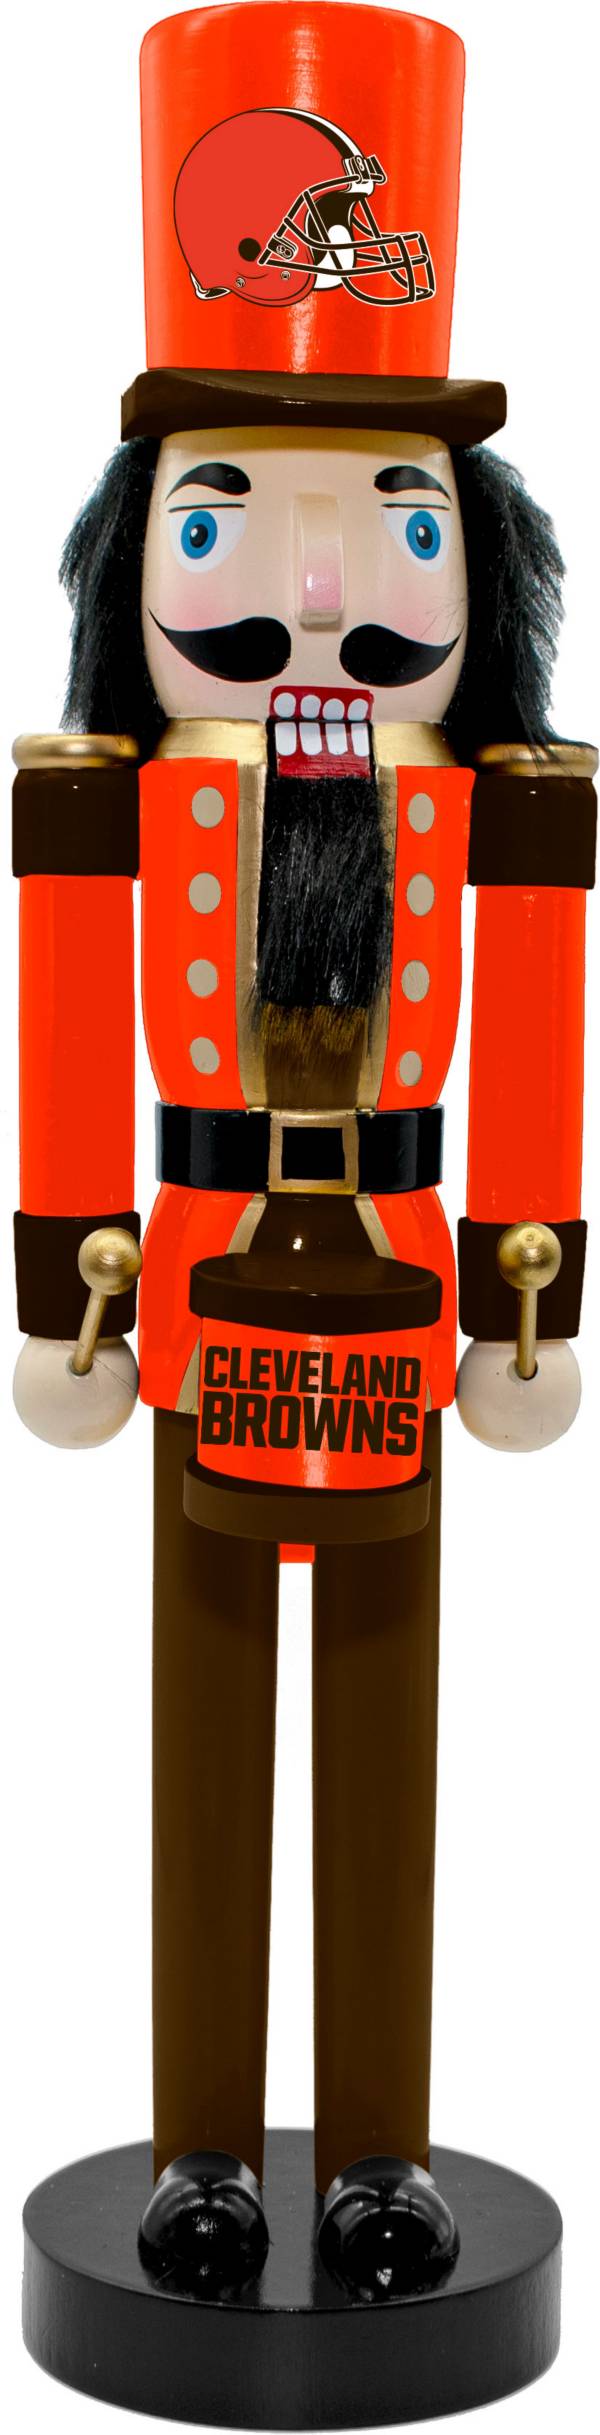 Memory Company Cleveland Browns 14 Inch Nutcracker product image